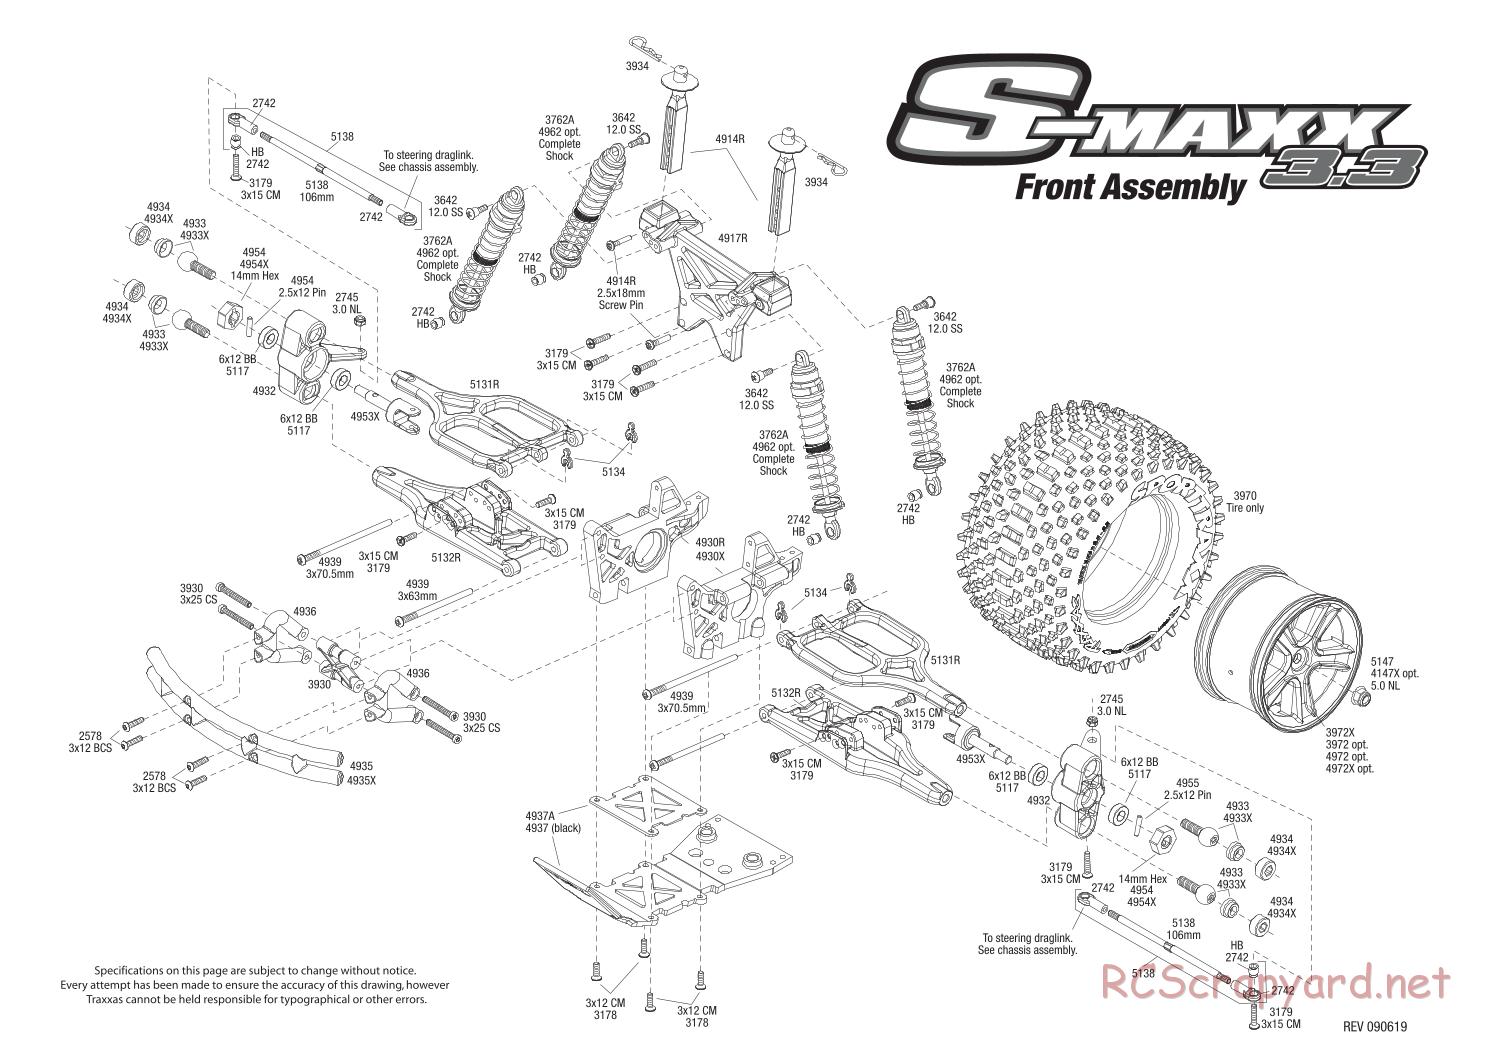 Traxxas - S-Maxx 2.5 (2004) - Exploded Views - Page 4